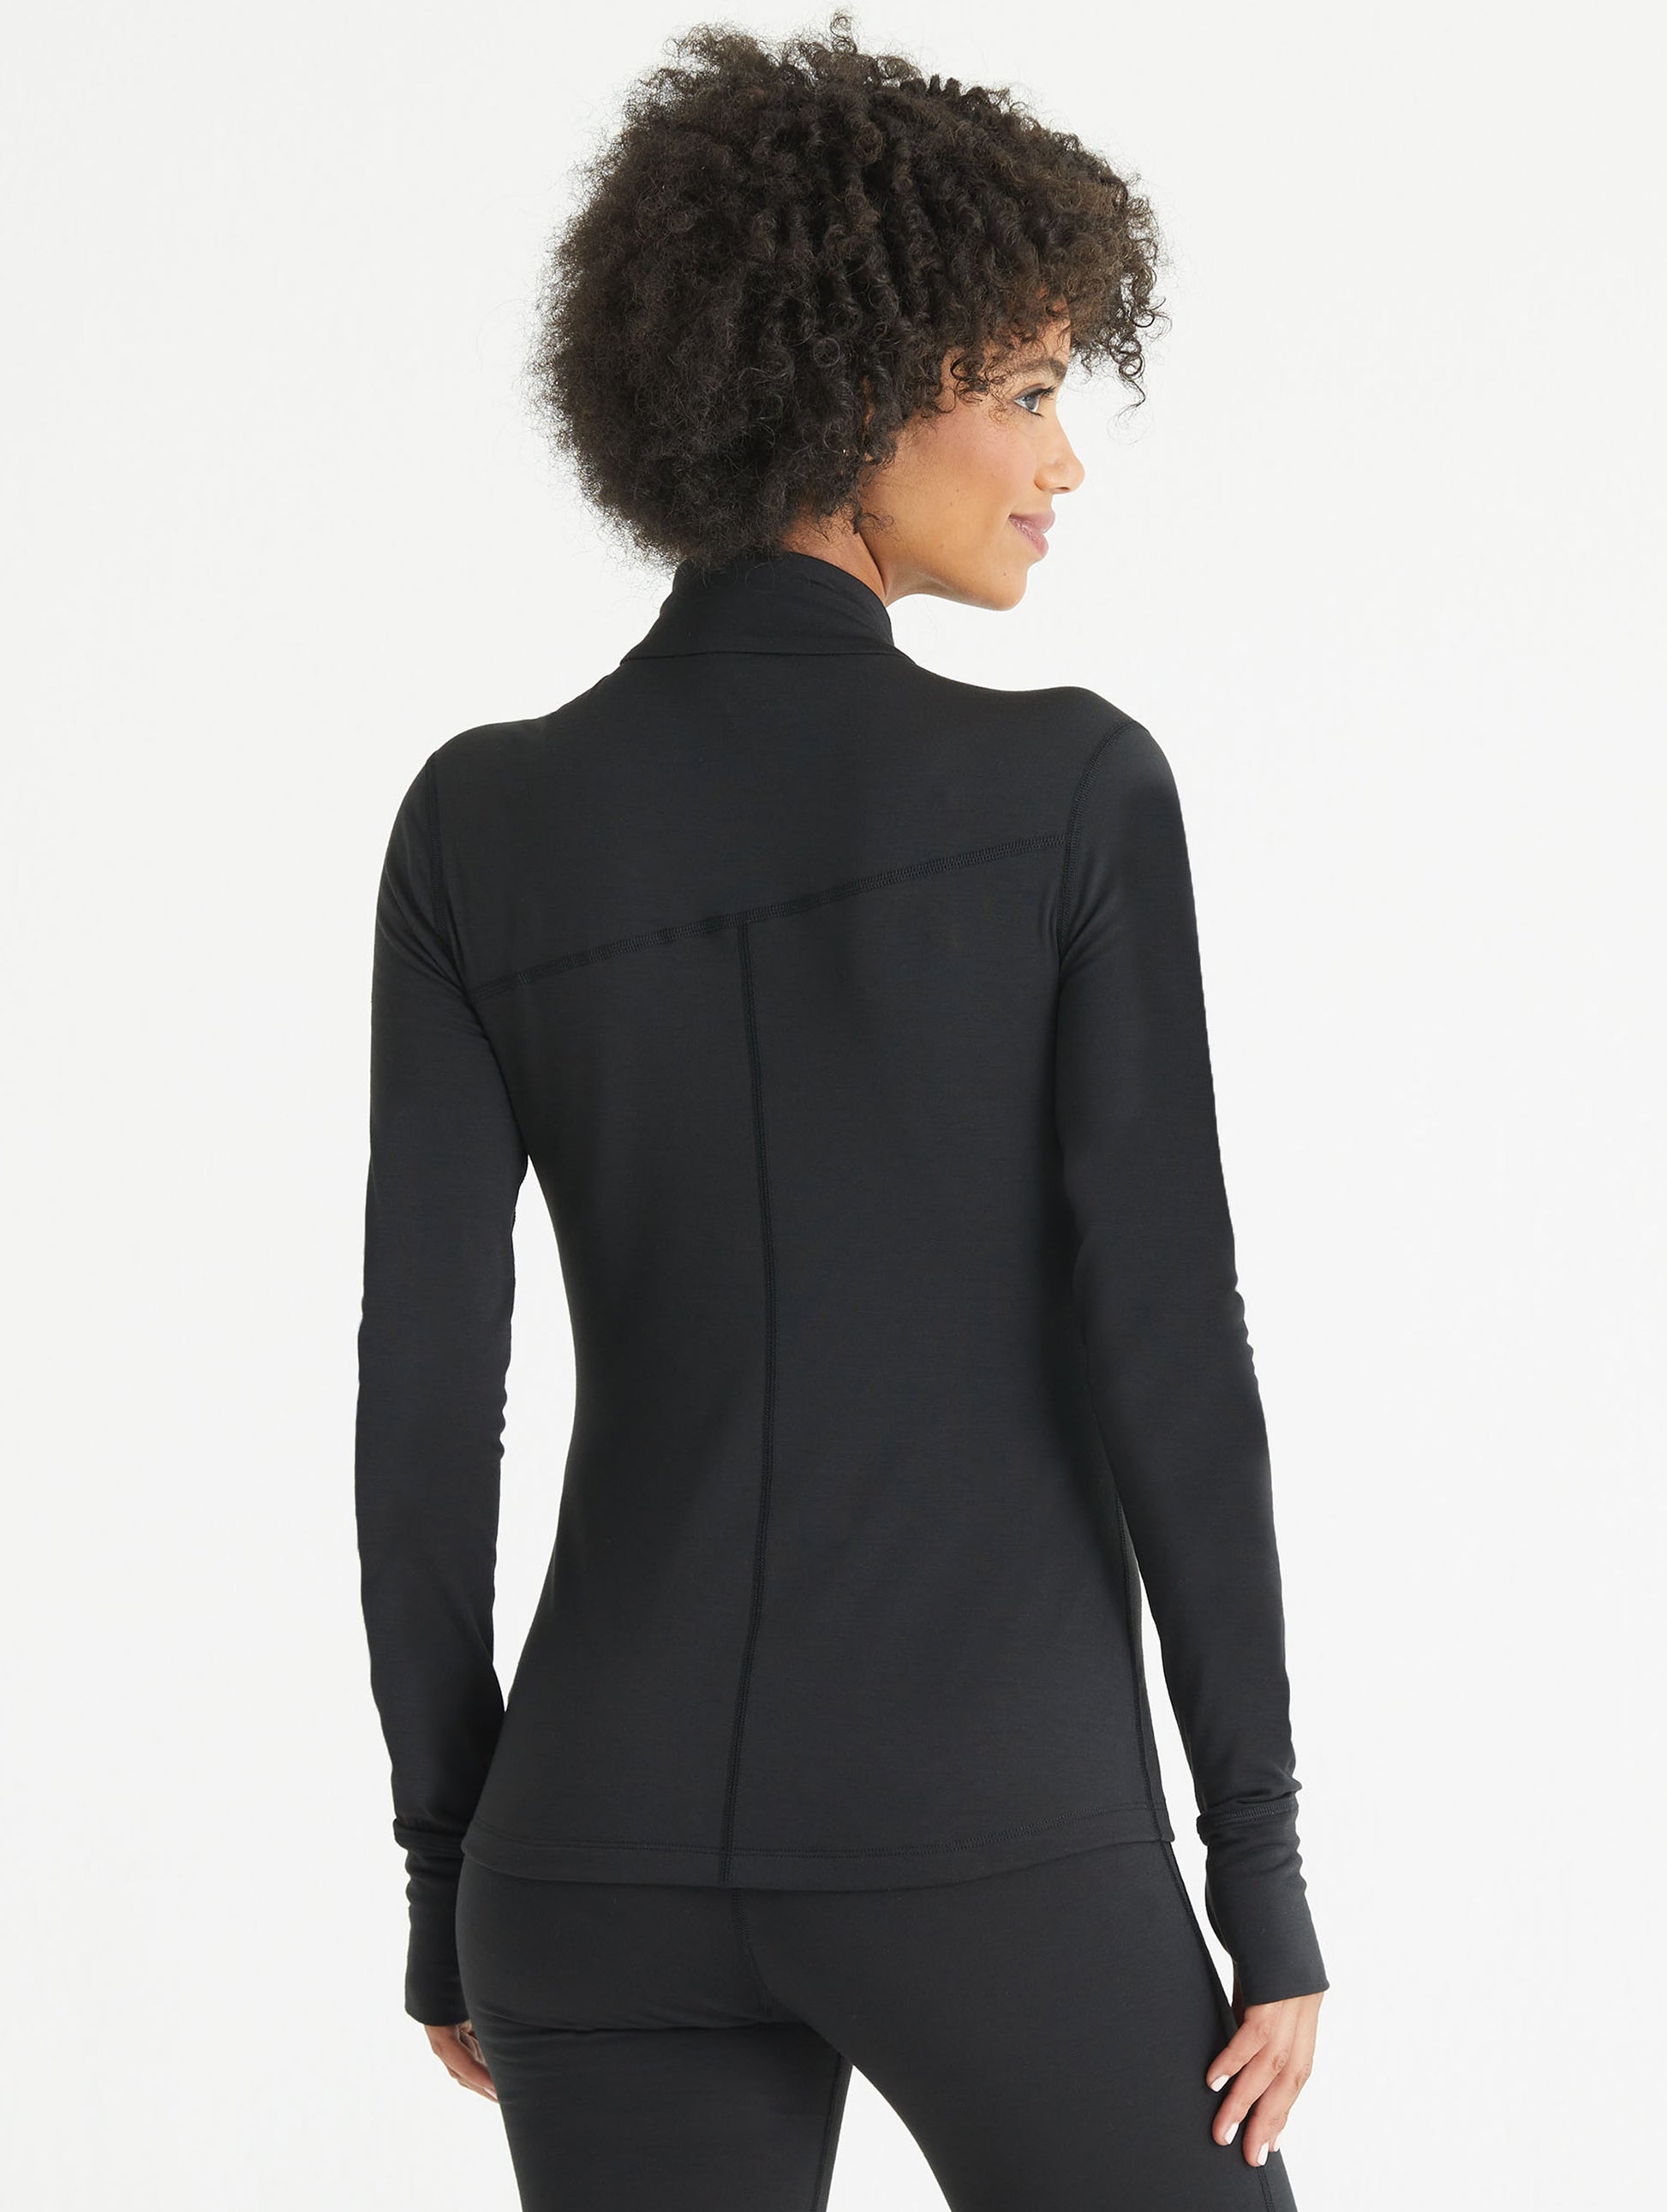 base layer jacket for women from Aether Apparel